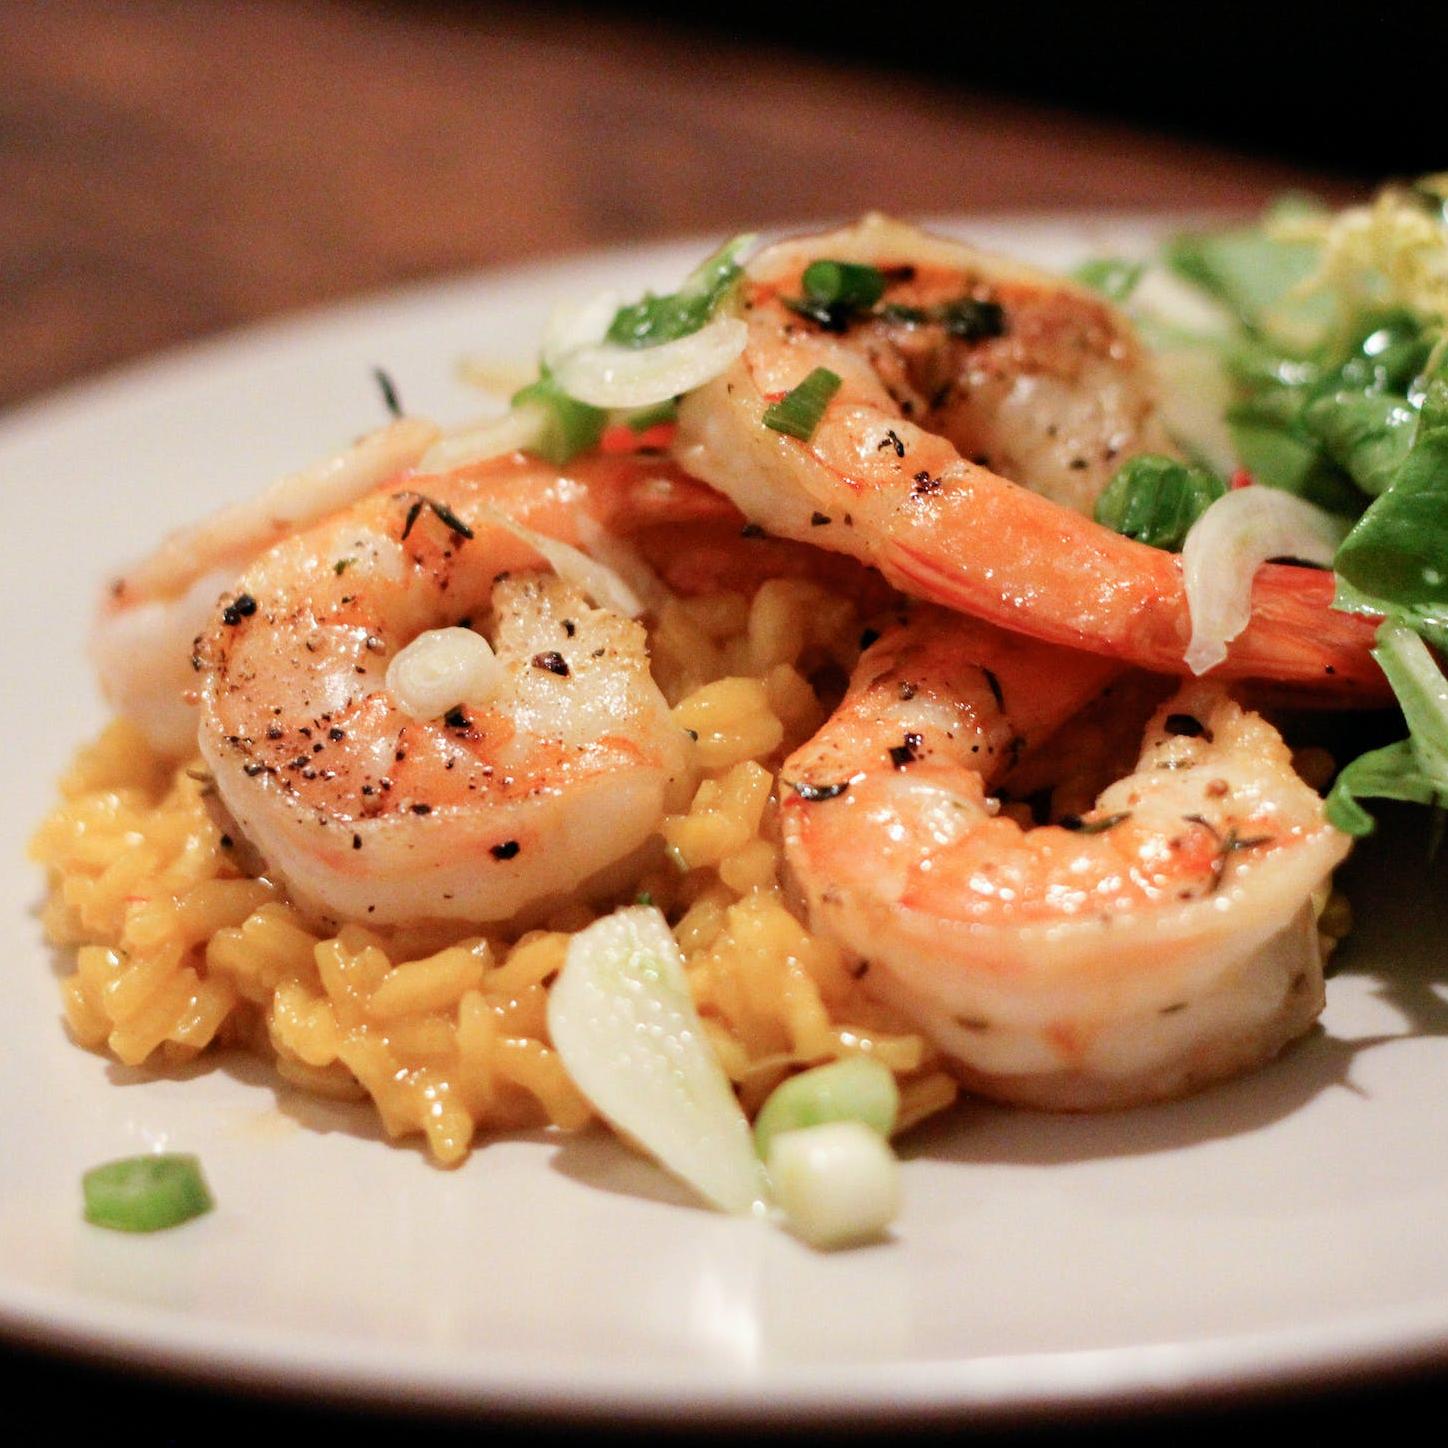  Transport yourself to the tropics with the flavors of our saffron-infused rice and savory shrimp.